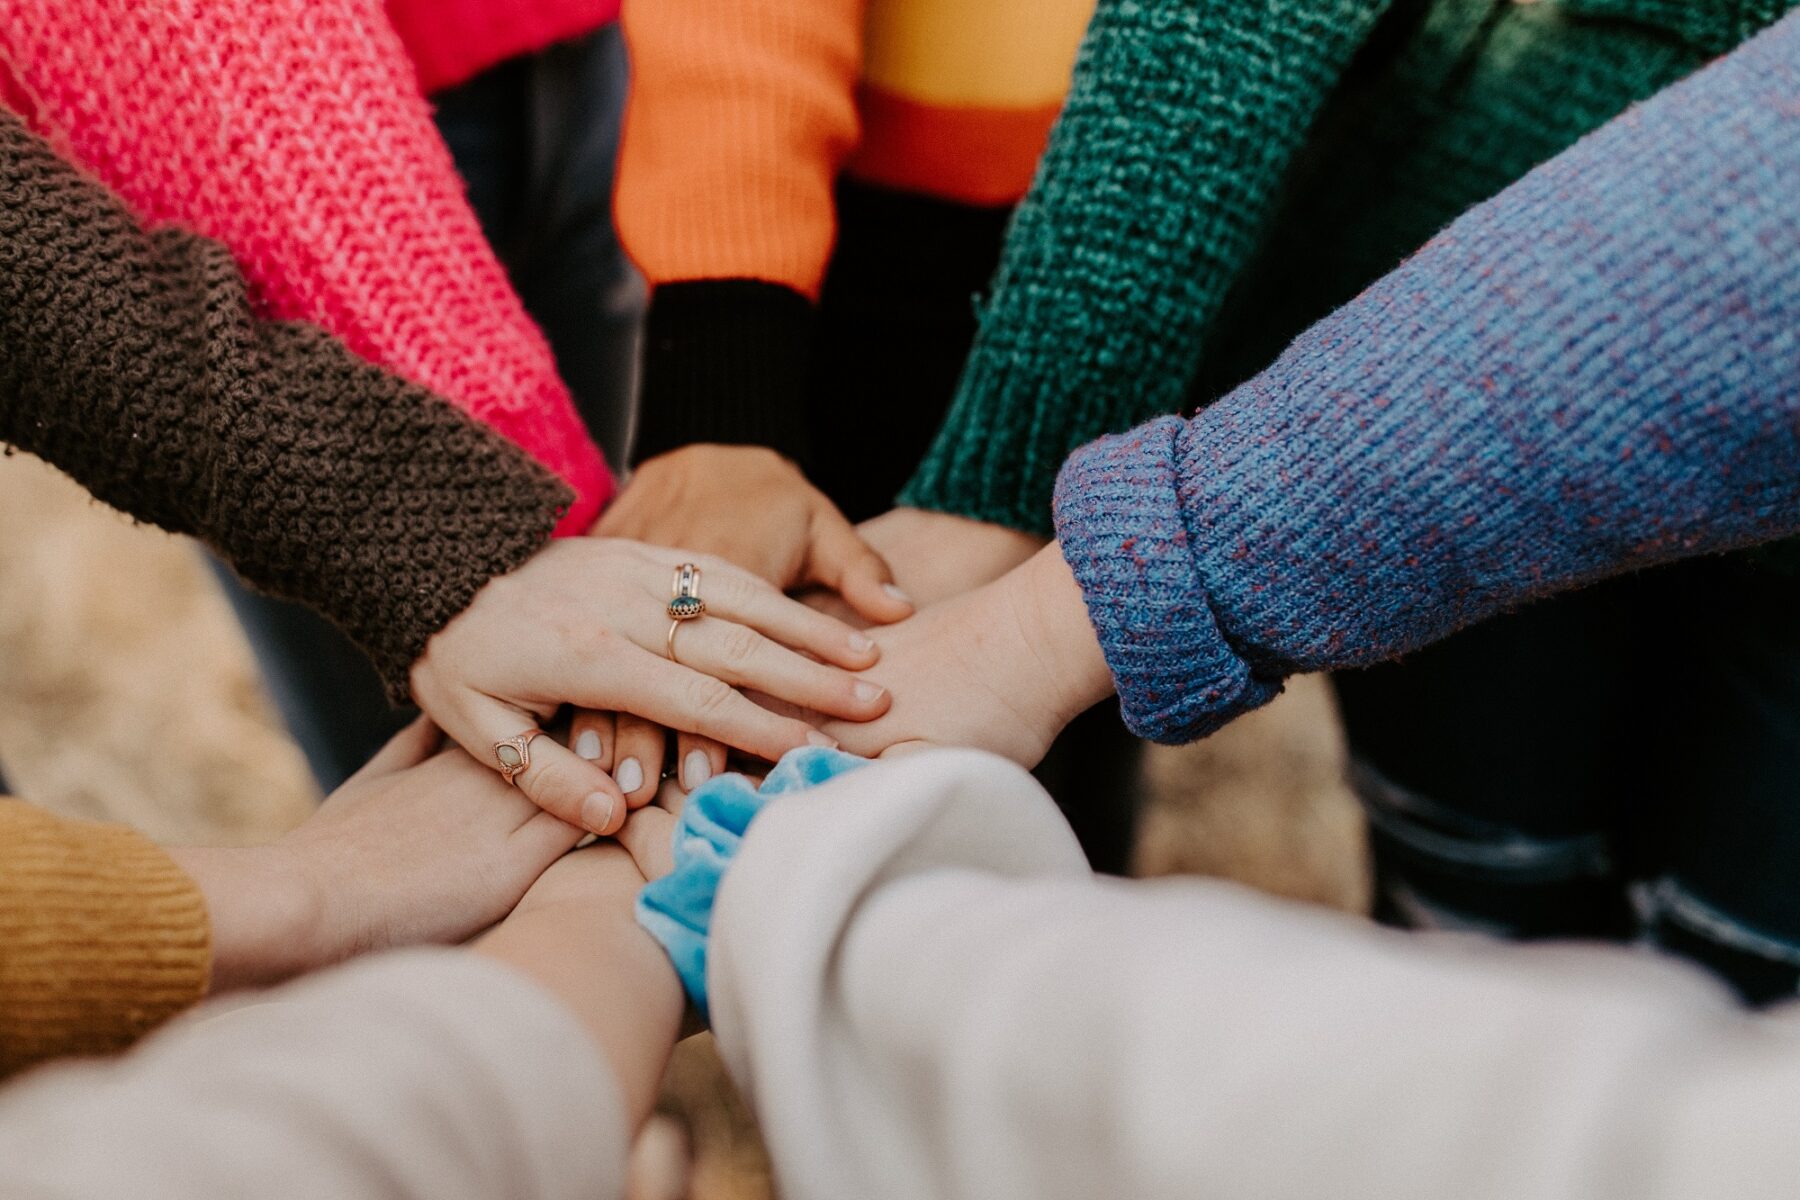 Group of people standing in a circle placing their hands together in the middle